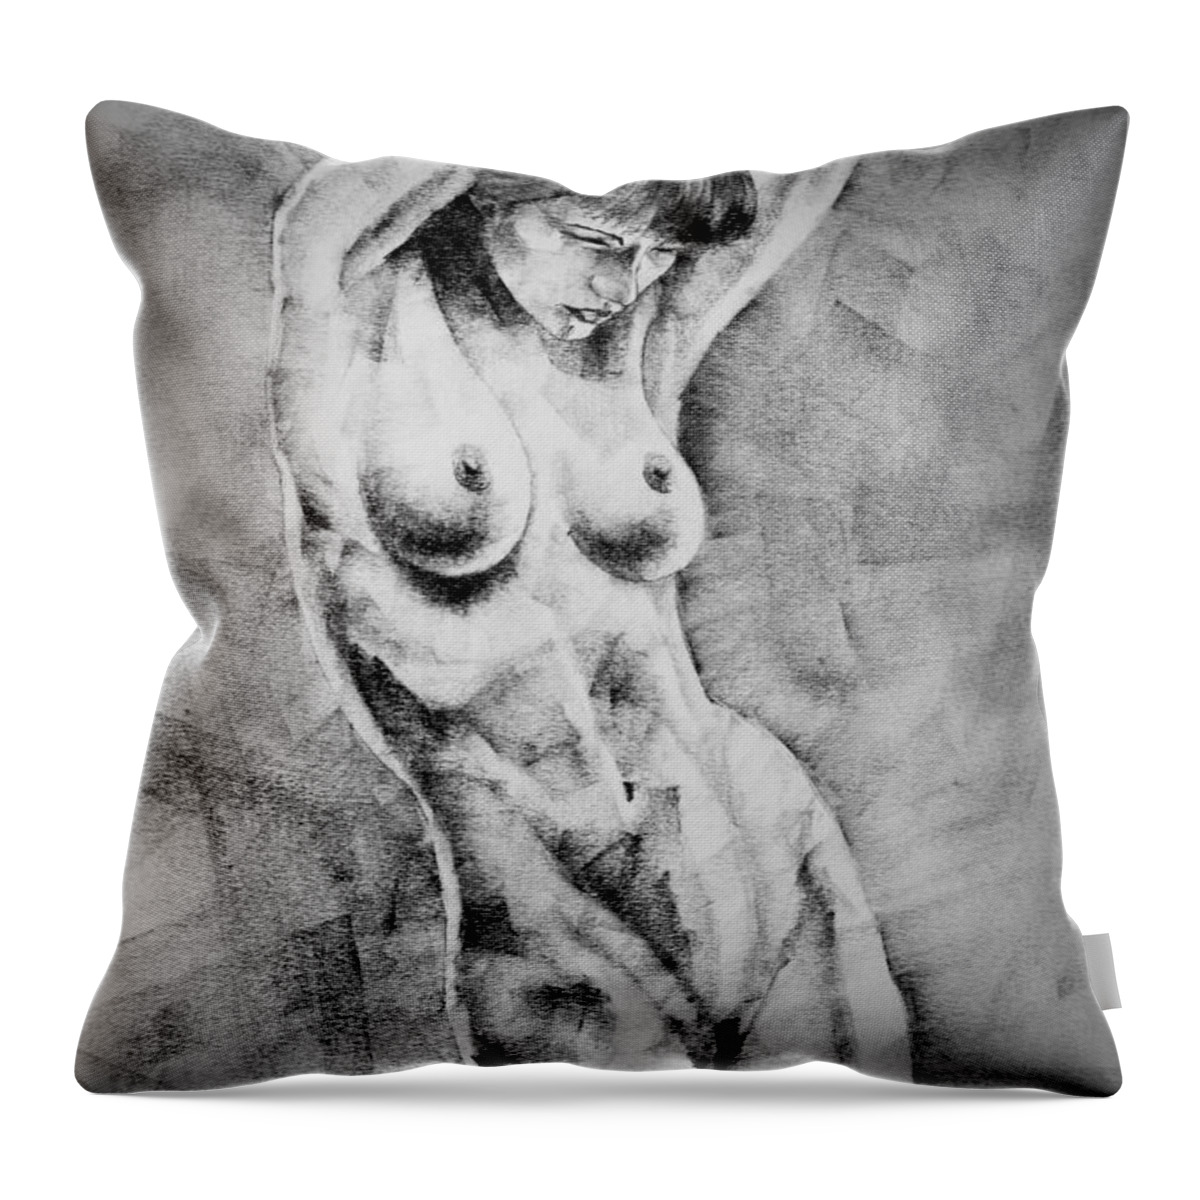 Erotic Throw Pillow featuring the drawing Page 17 by Dimitar Hristov